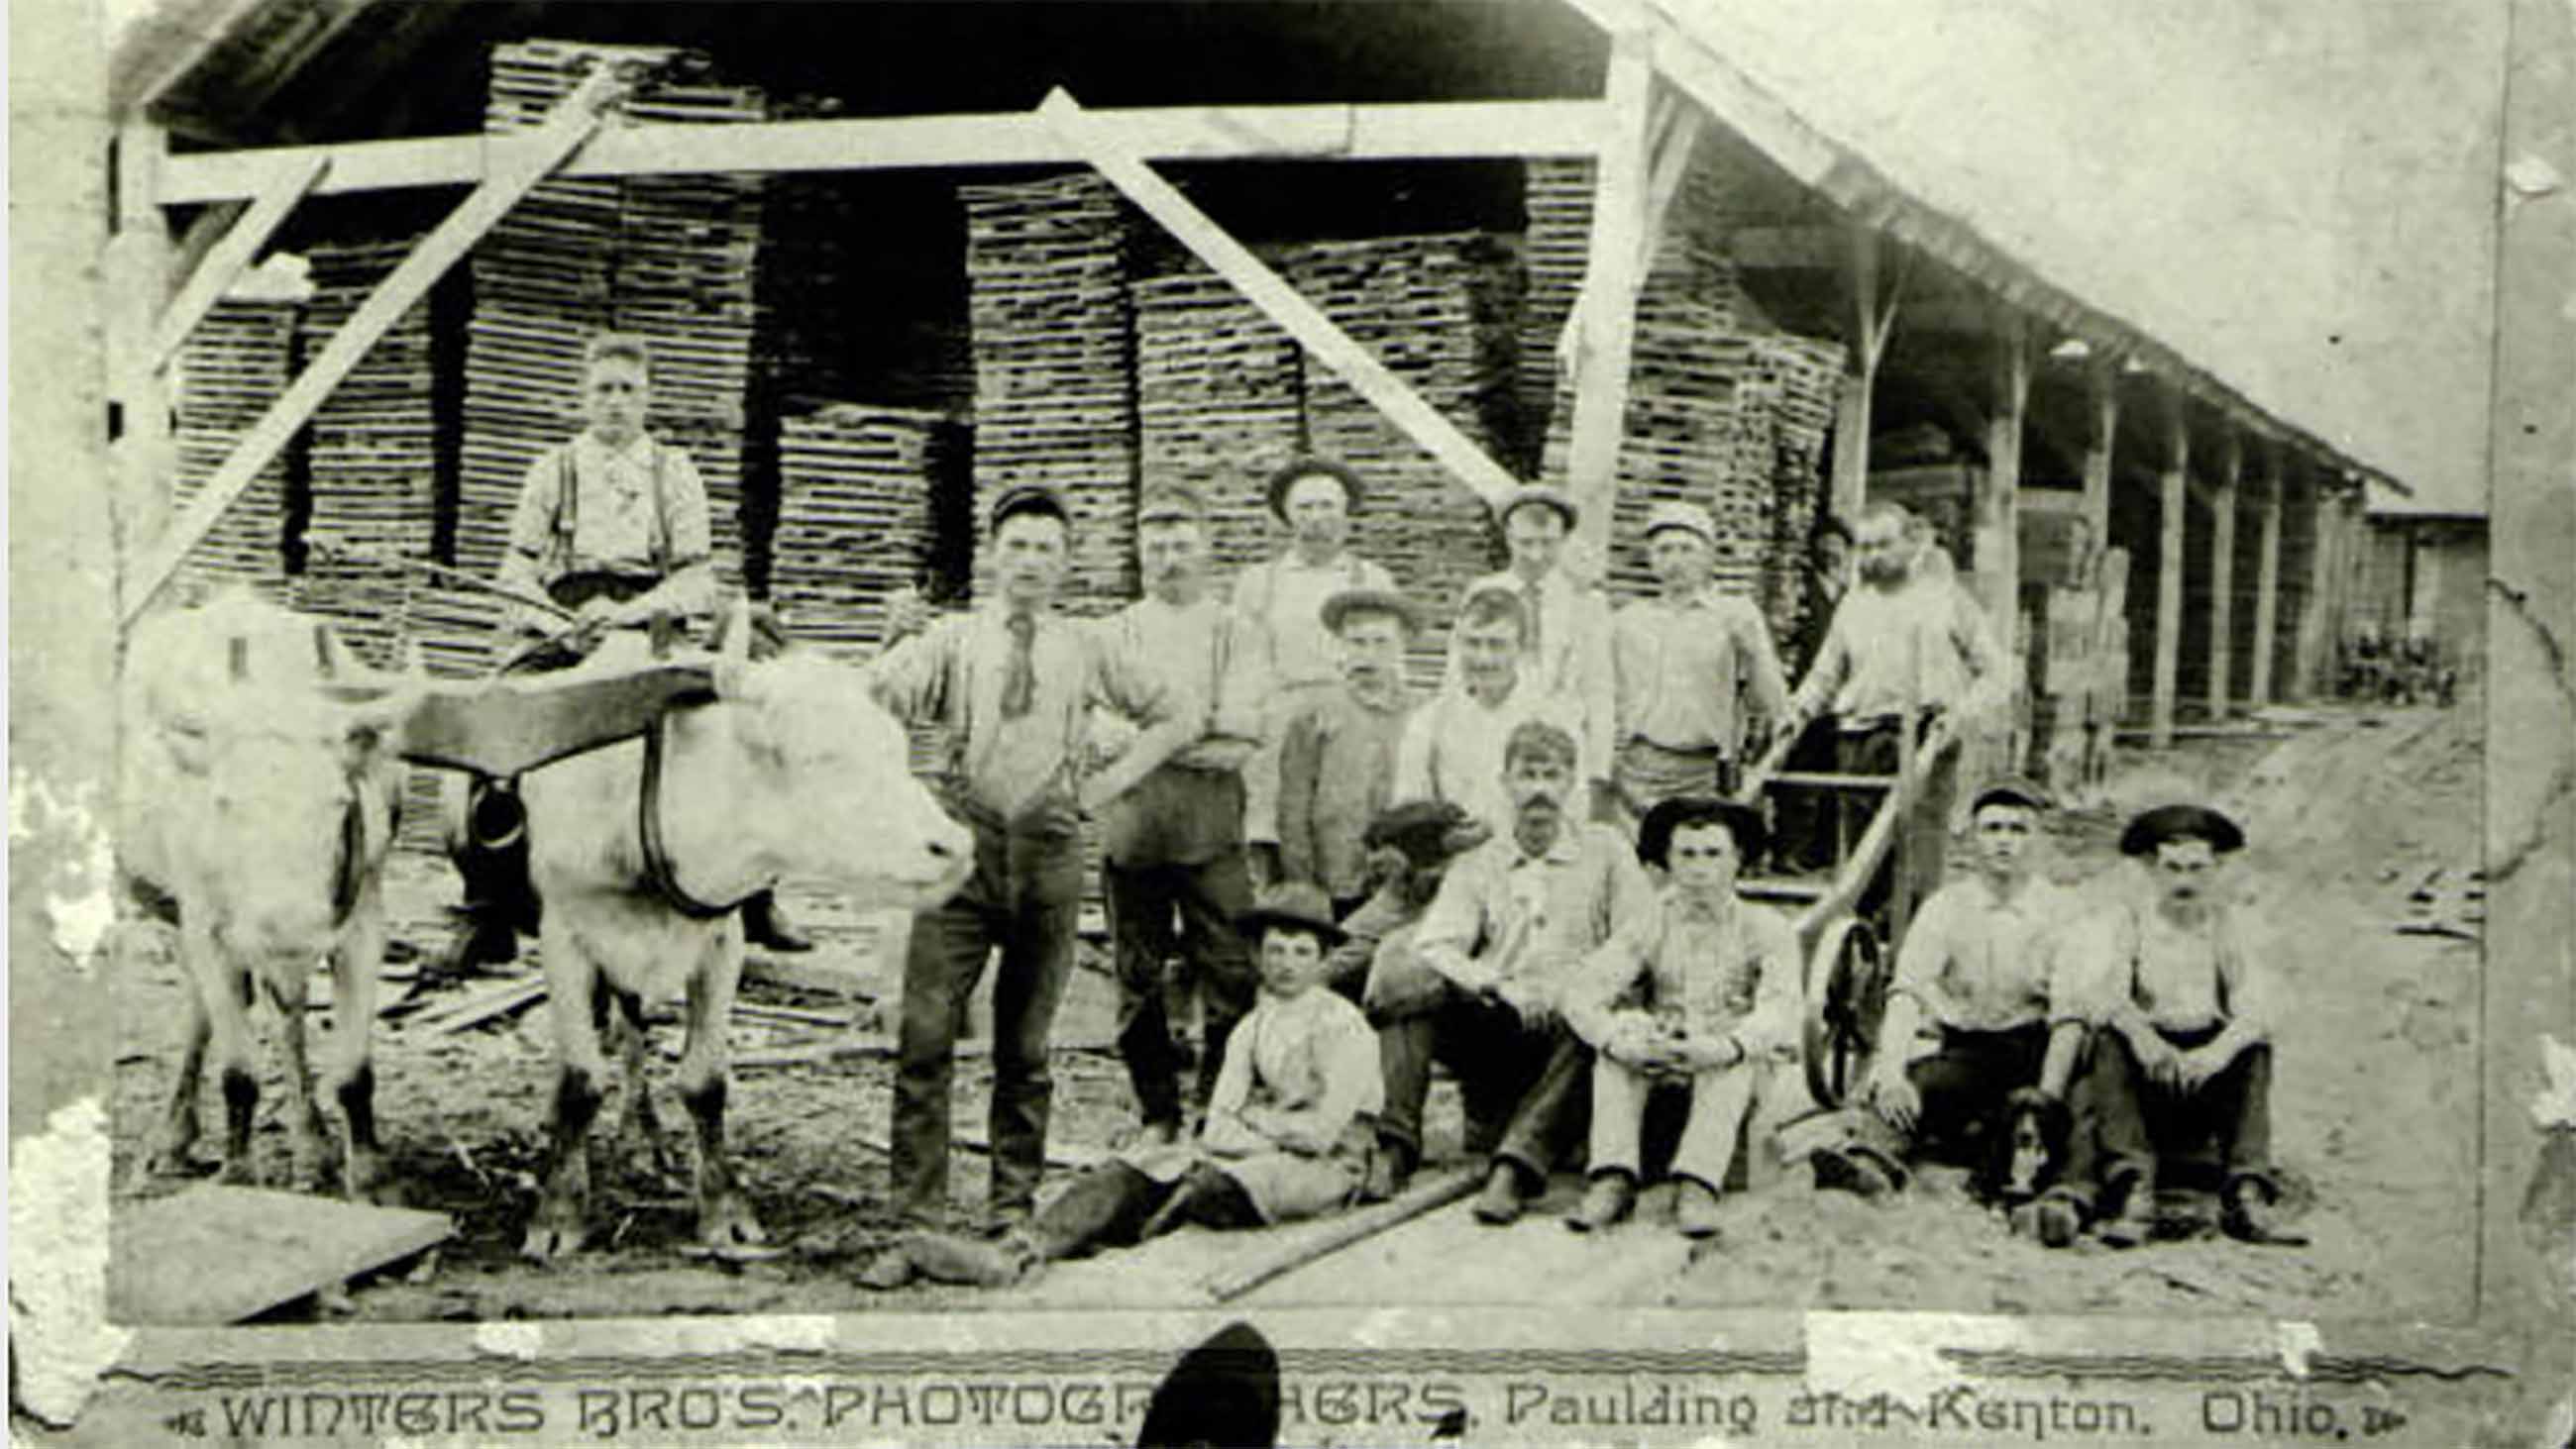 Businesses like the Wheeler Brothers hoop and stave mill in Melrose, Ohio, thrived on the cheap lumber harvested from the Great Black Swamp as it was tamed. But the marsh provided services that would later be missed. (Image courtesy of the Center for Archival Collections, Bowling Green State University).